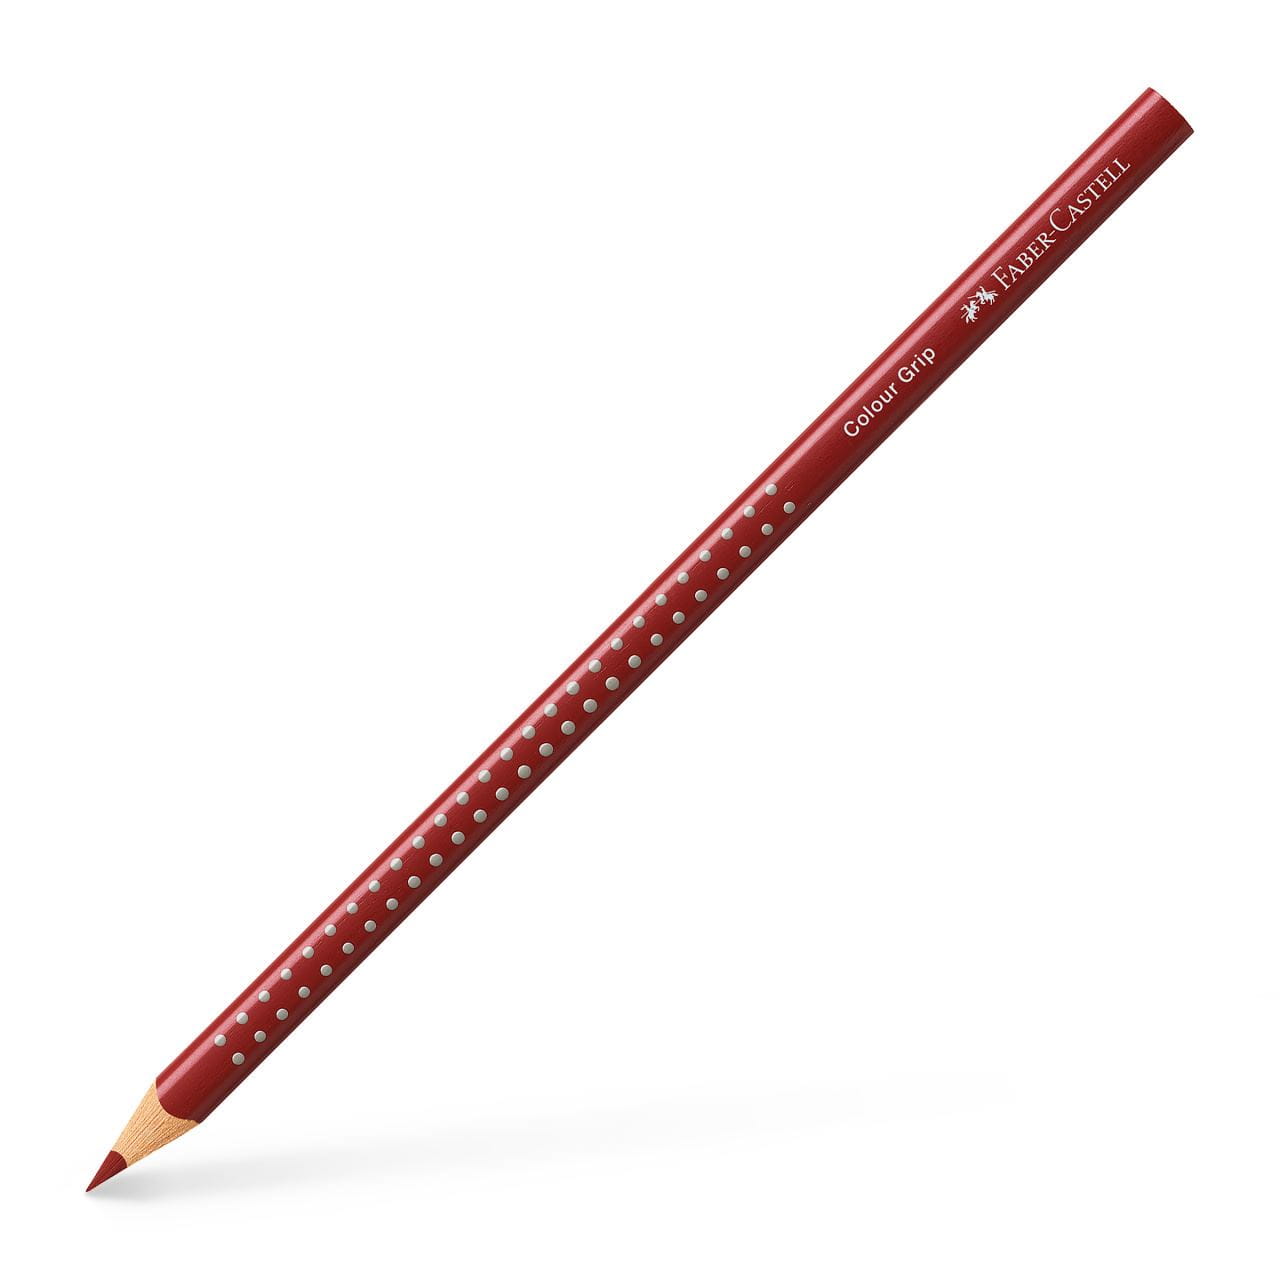 Faber-Castell - Matite Colorate Colour Grip rosso indiano